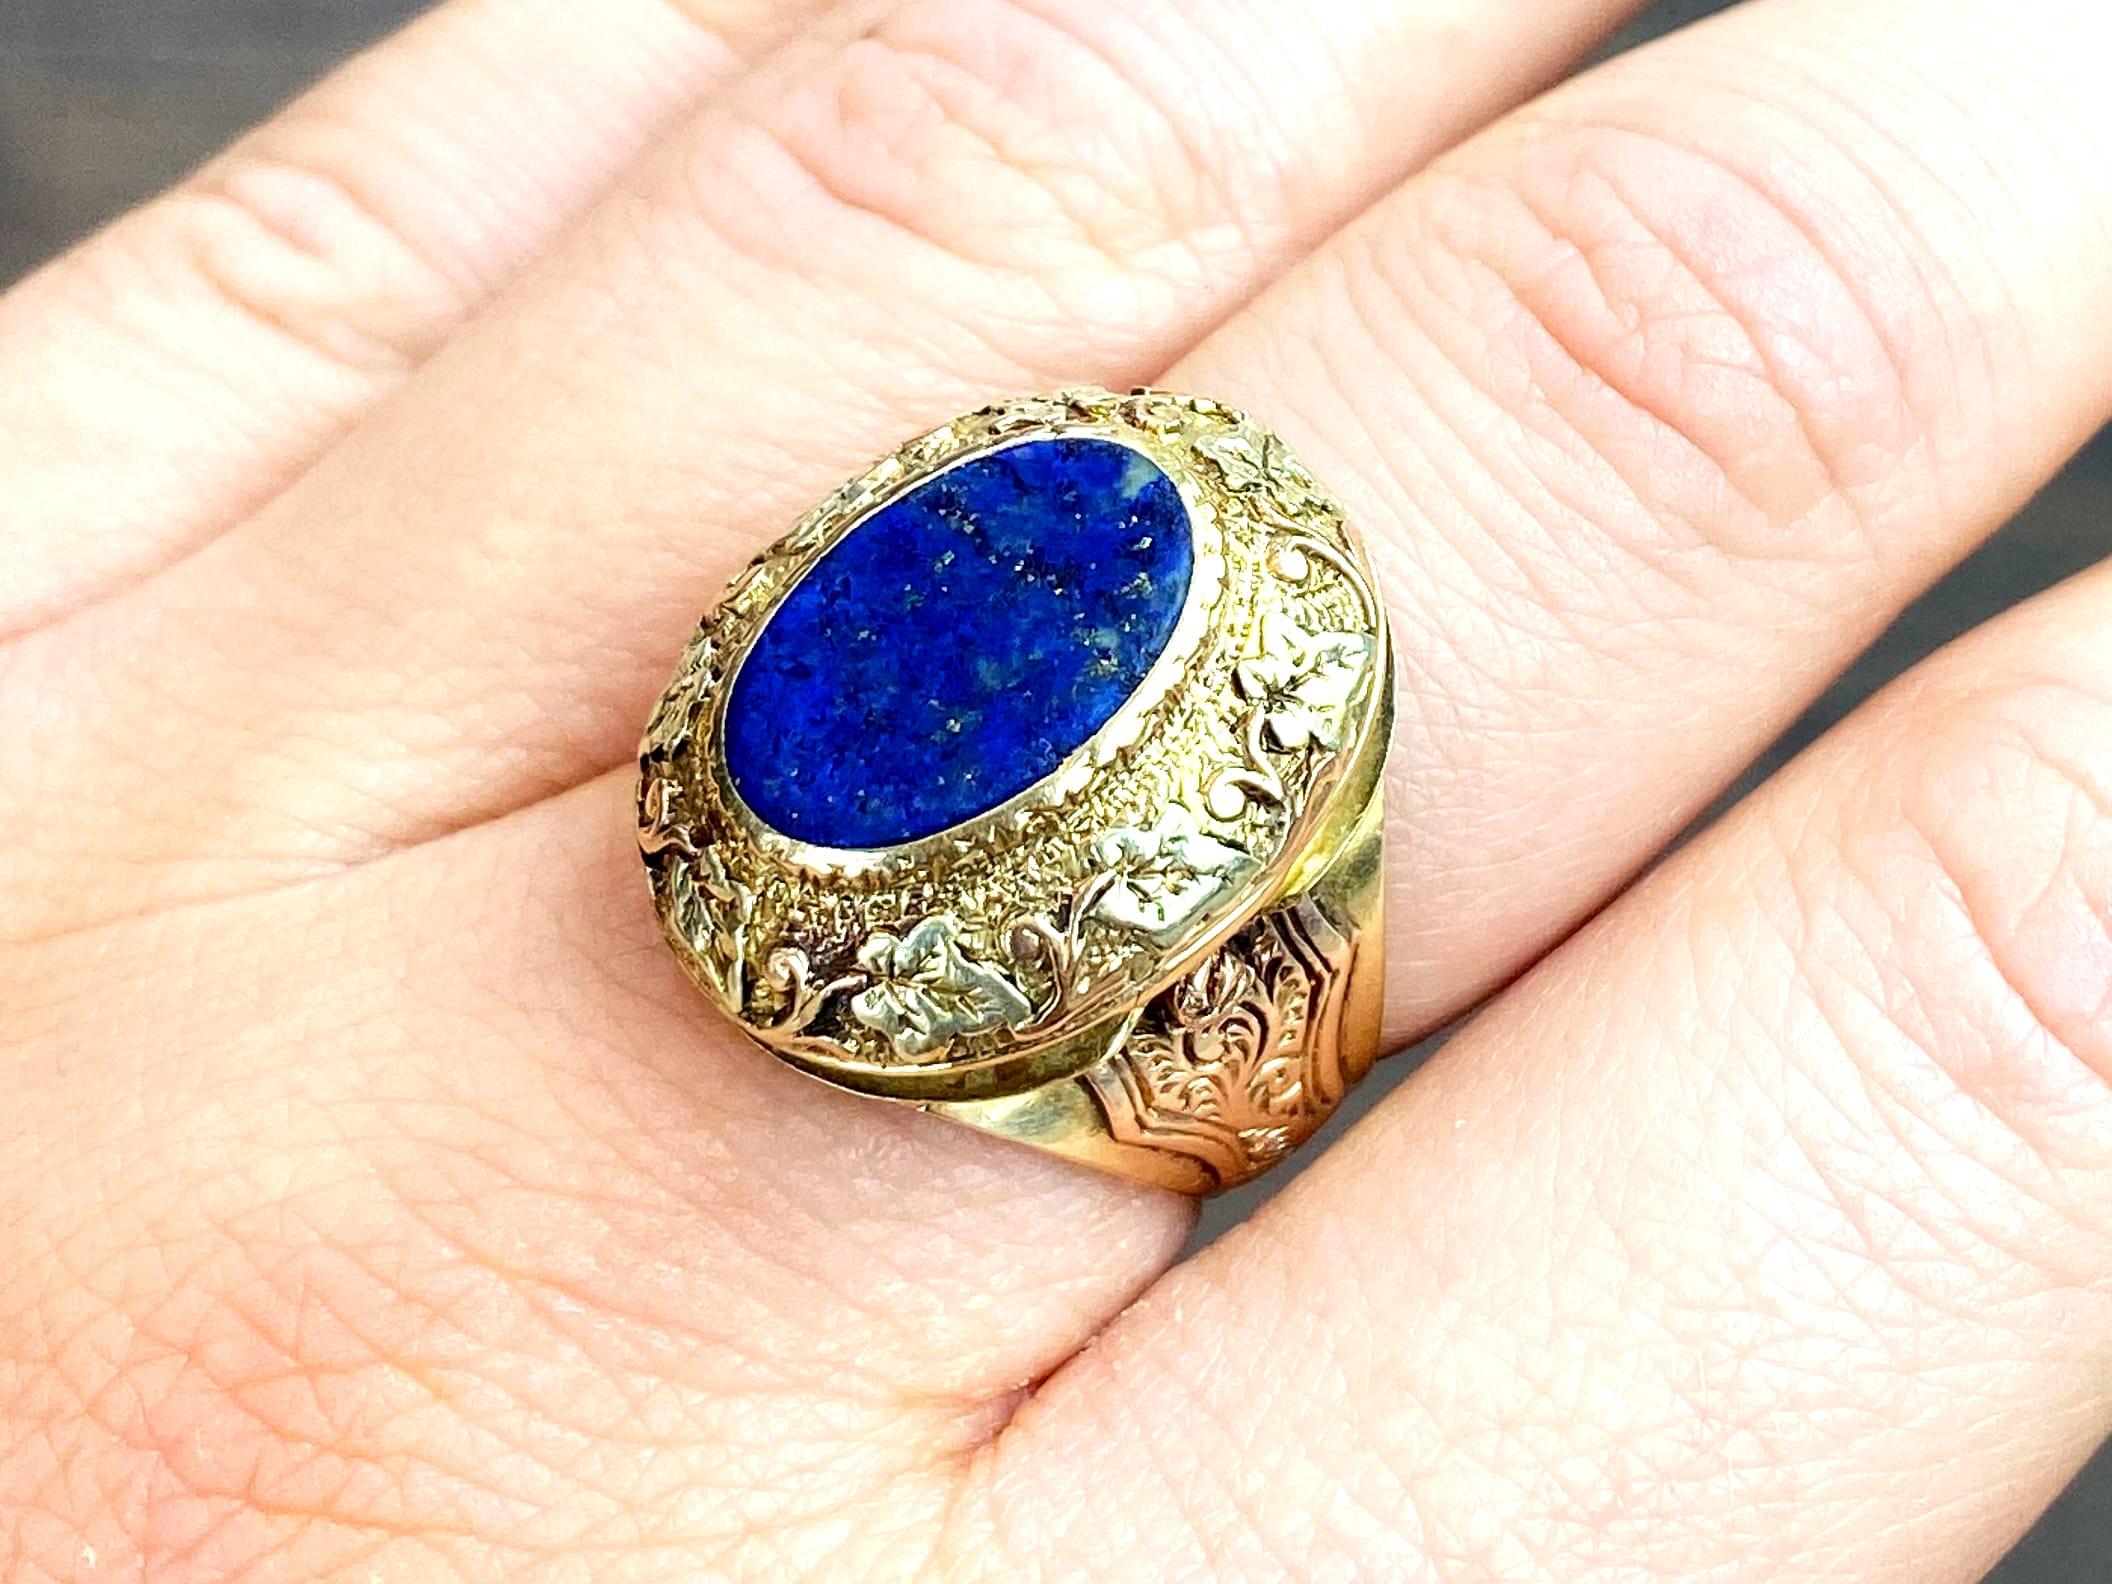 Oval Cut Antique 3.02Ct Lapis Lazuli and 15k Yellow Gold Locket Ring Circa 1880 For Sale